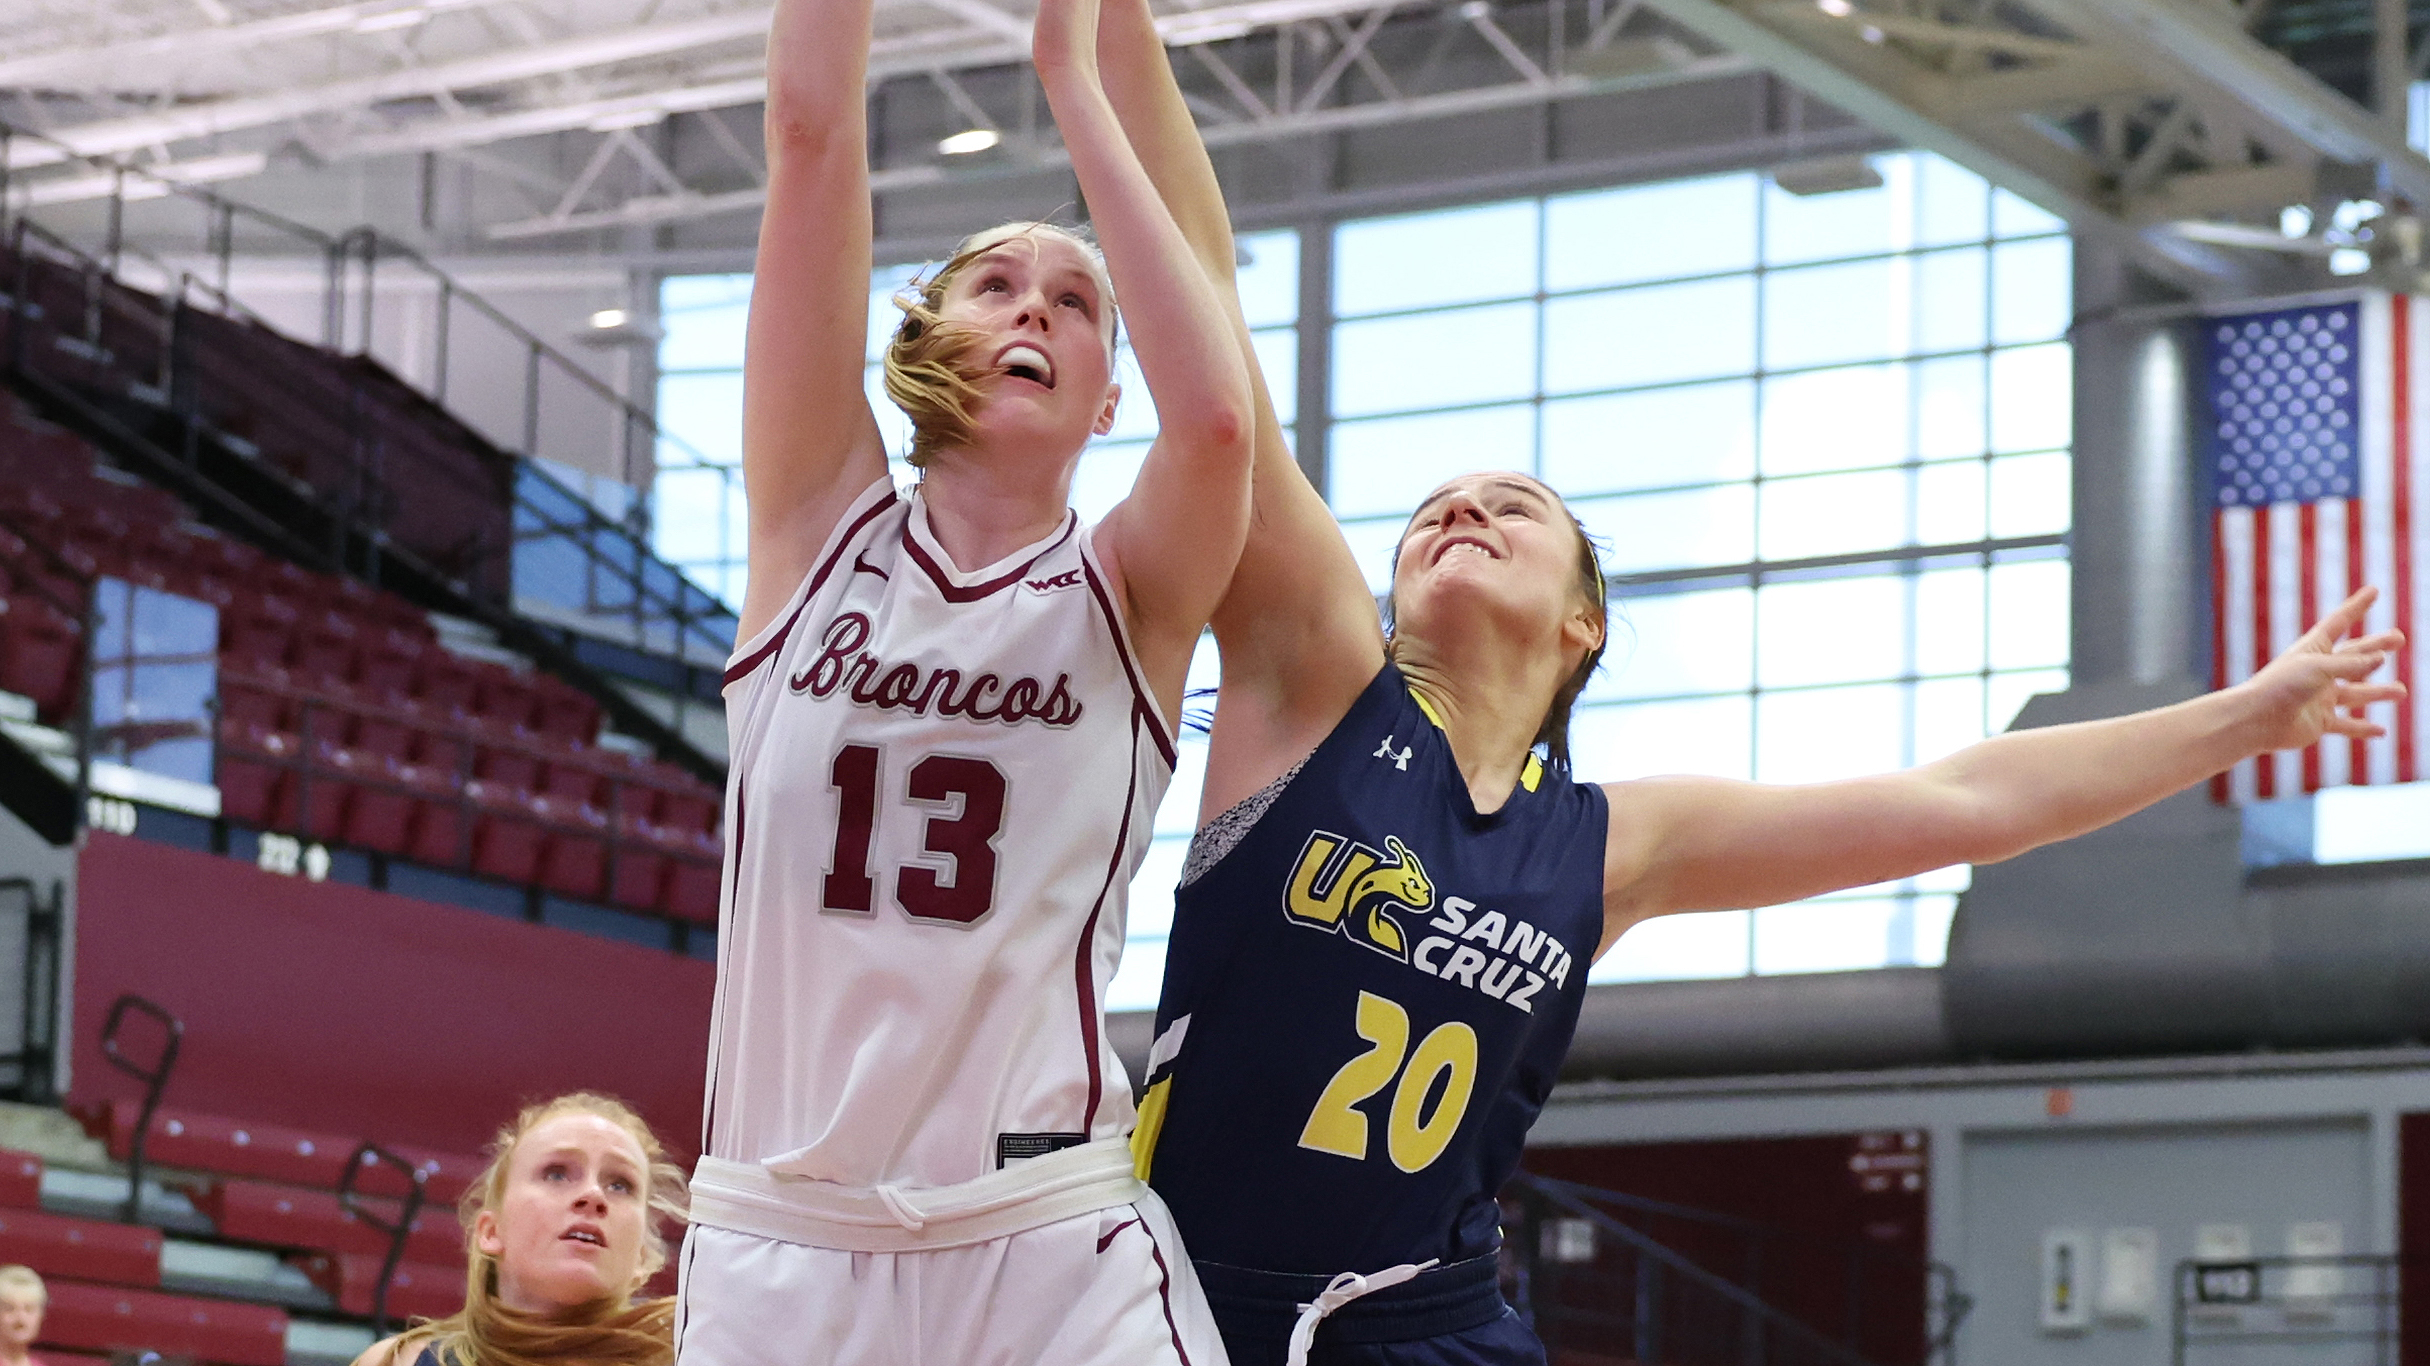 Women's Basketball Turns in Another Strong Performance Before Finals Break